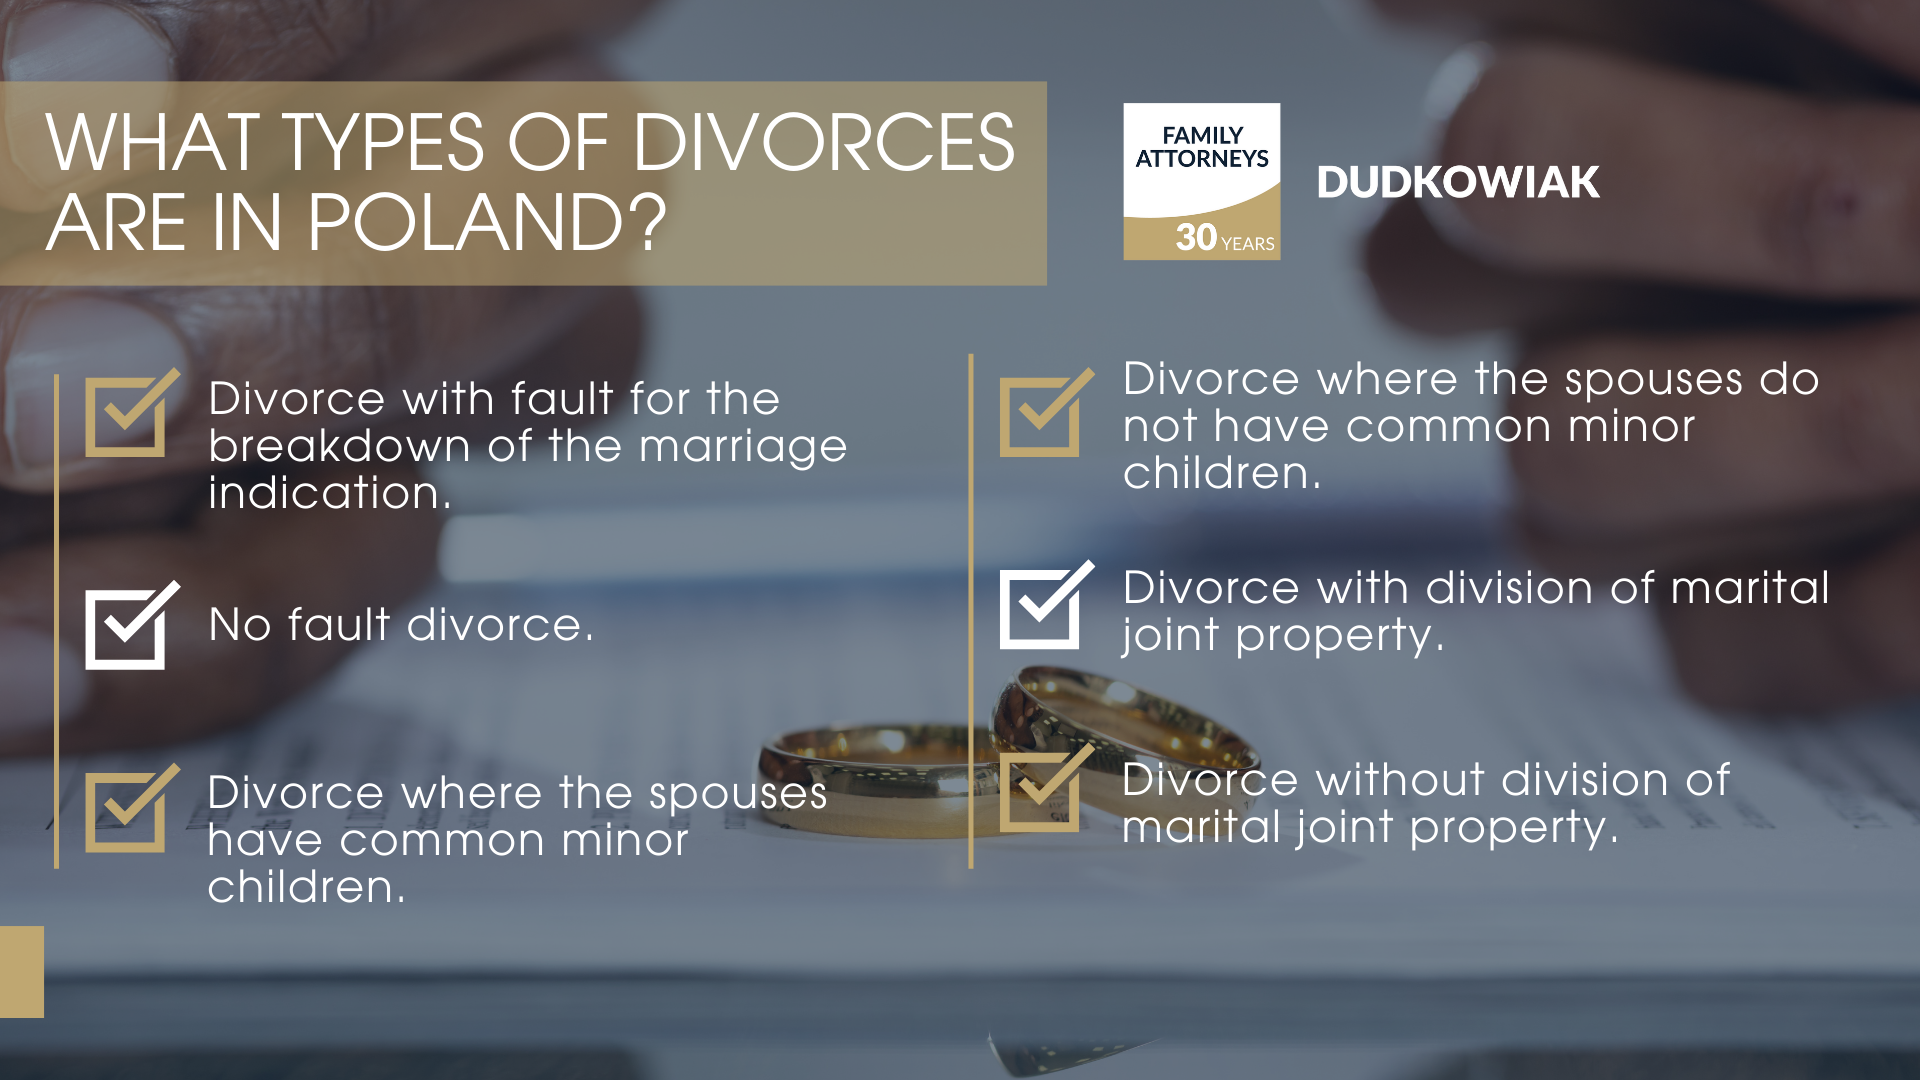 What types of divorces are in Poland?